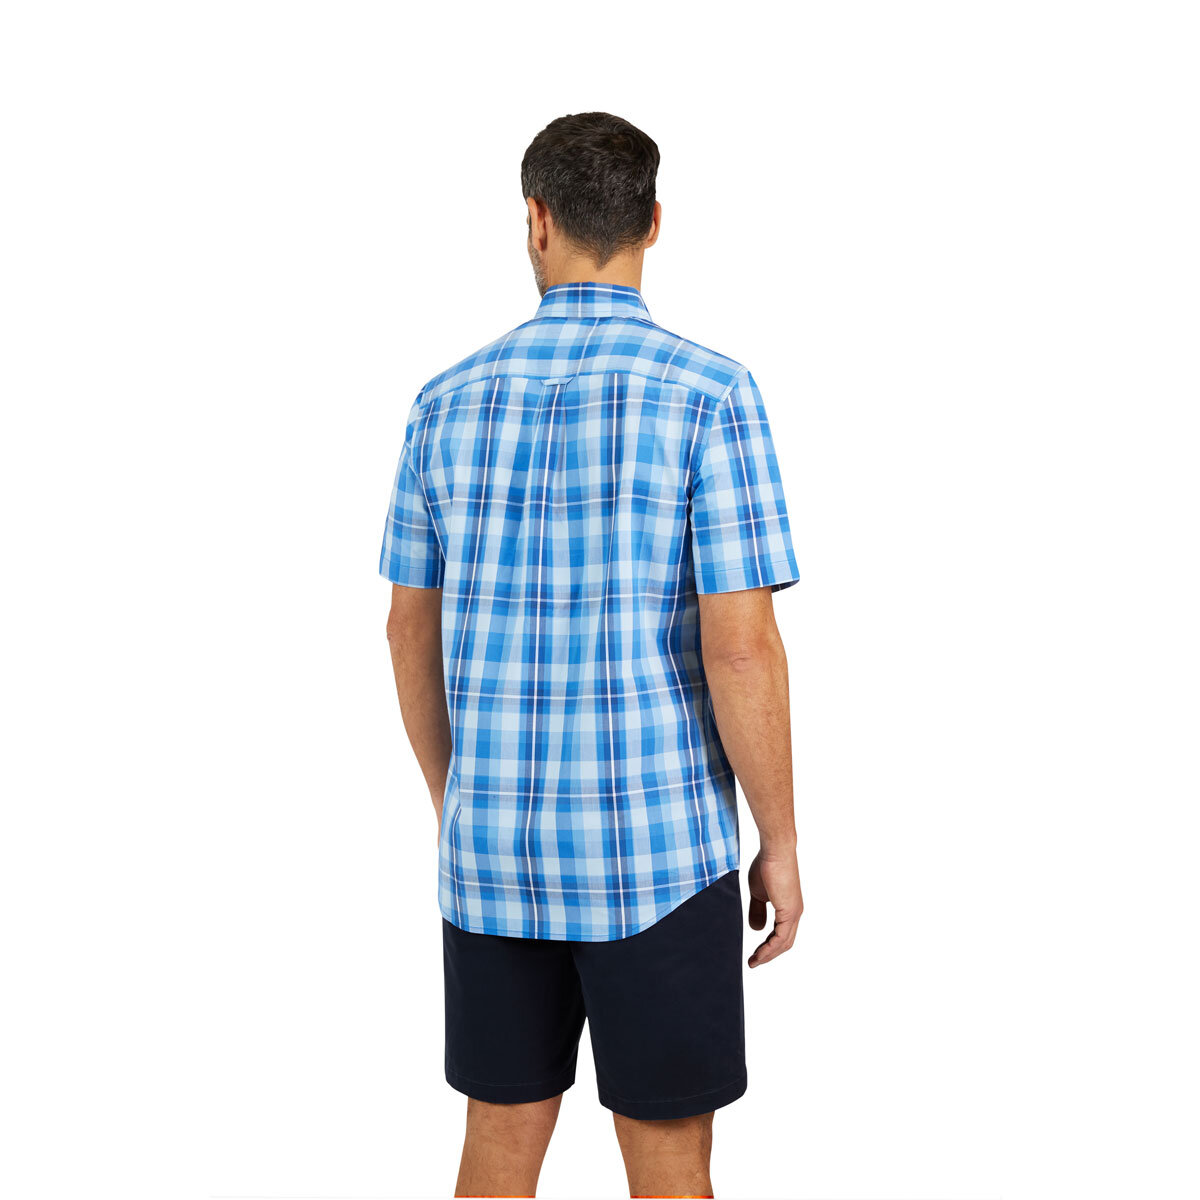 Chaps Men’s Easy Care Short Sleeve Woven Shirt in Marina Blue